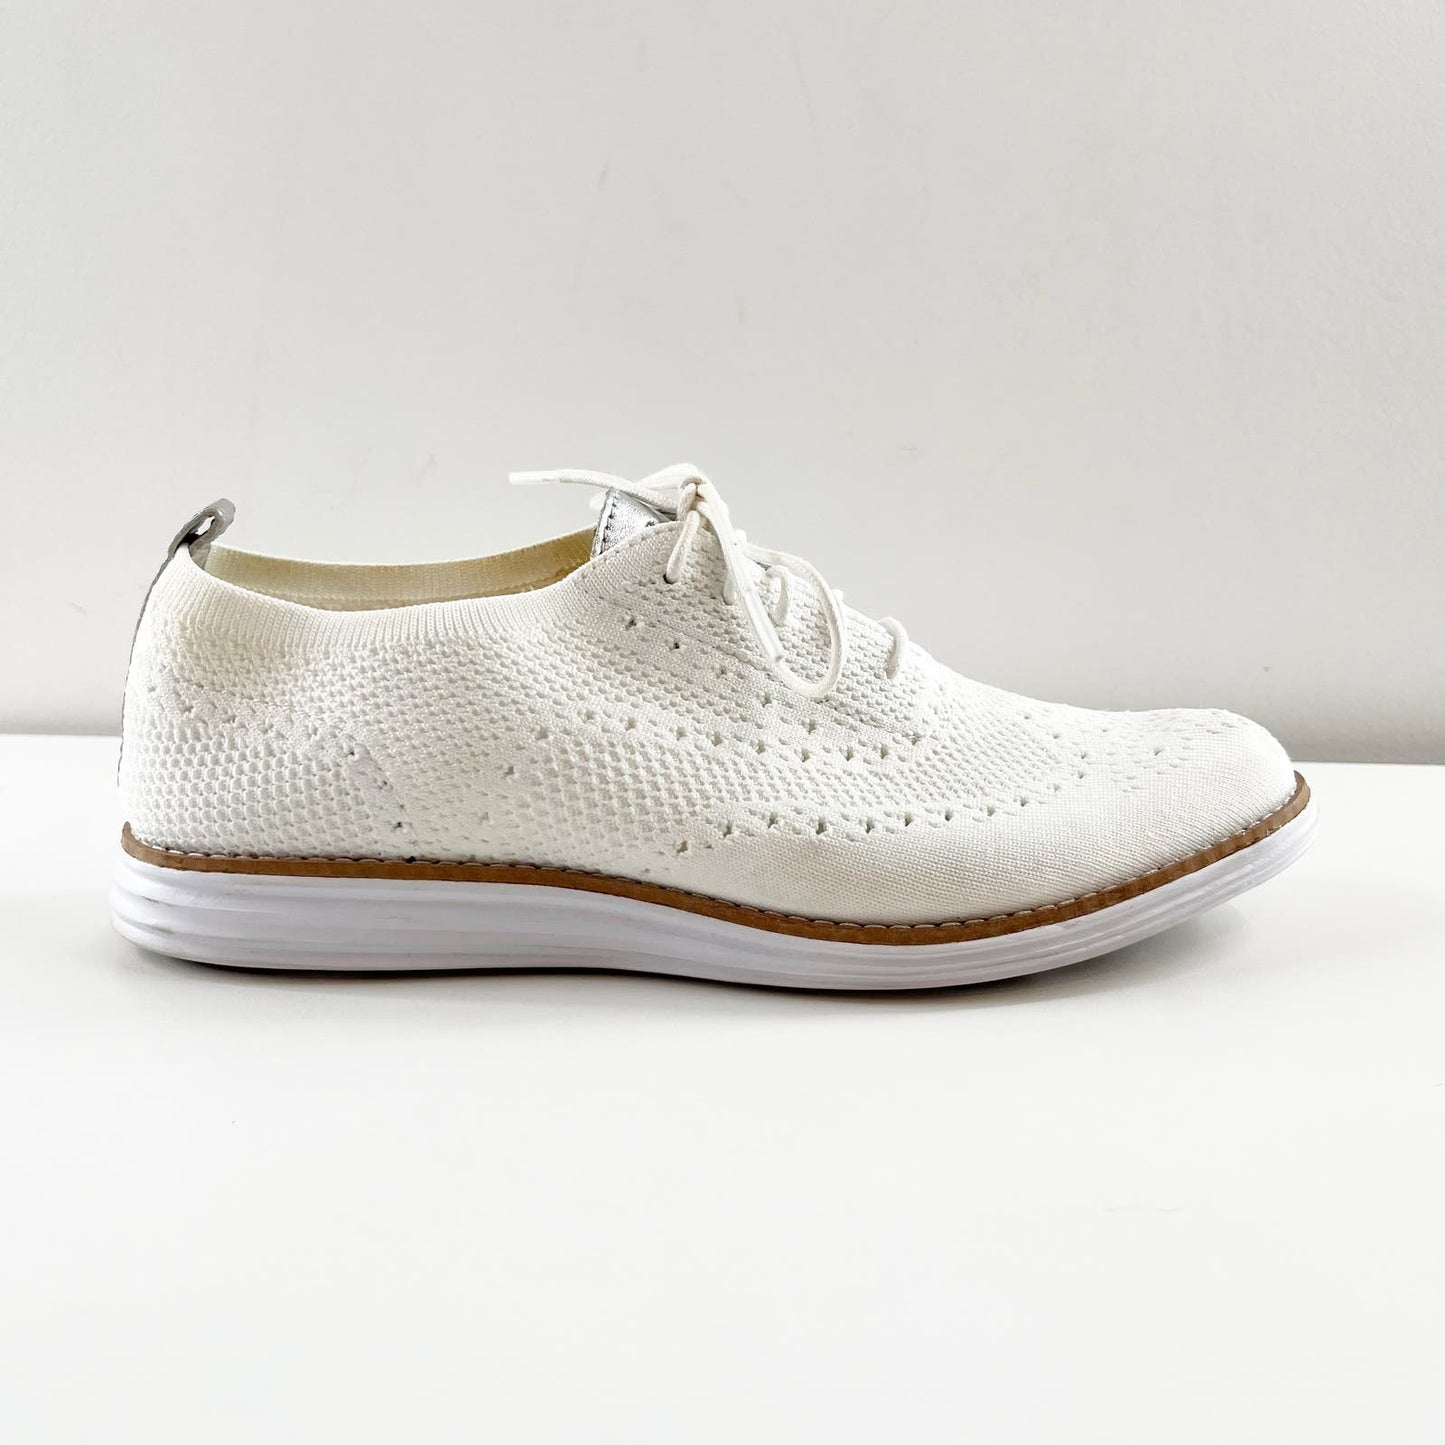 Cole Haan Original Grand Lace Up Shoes Sneakers Oxfords White 9.5